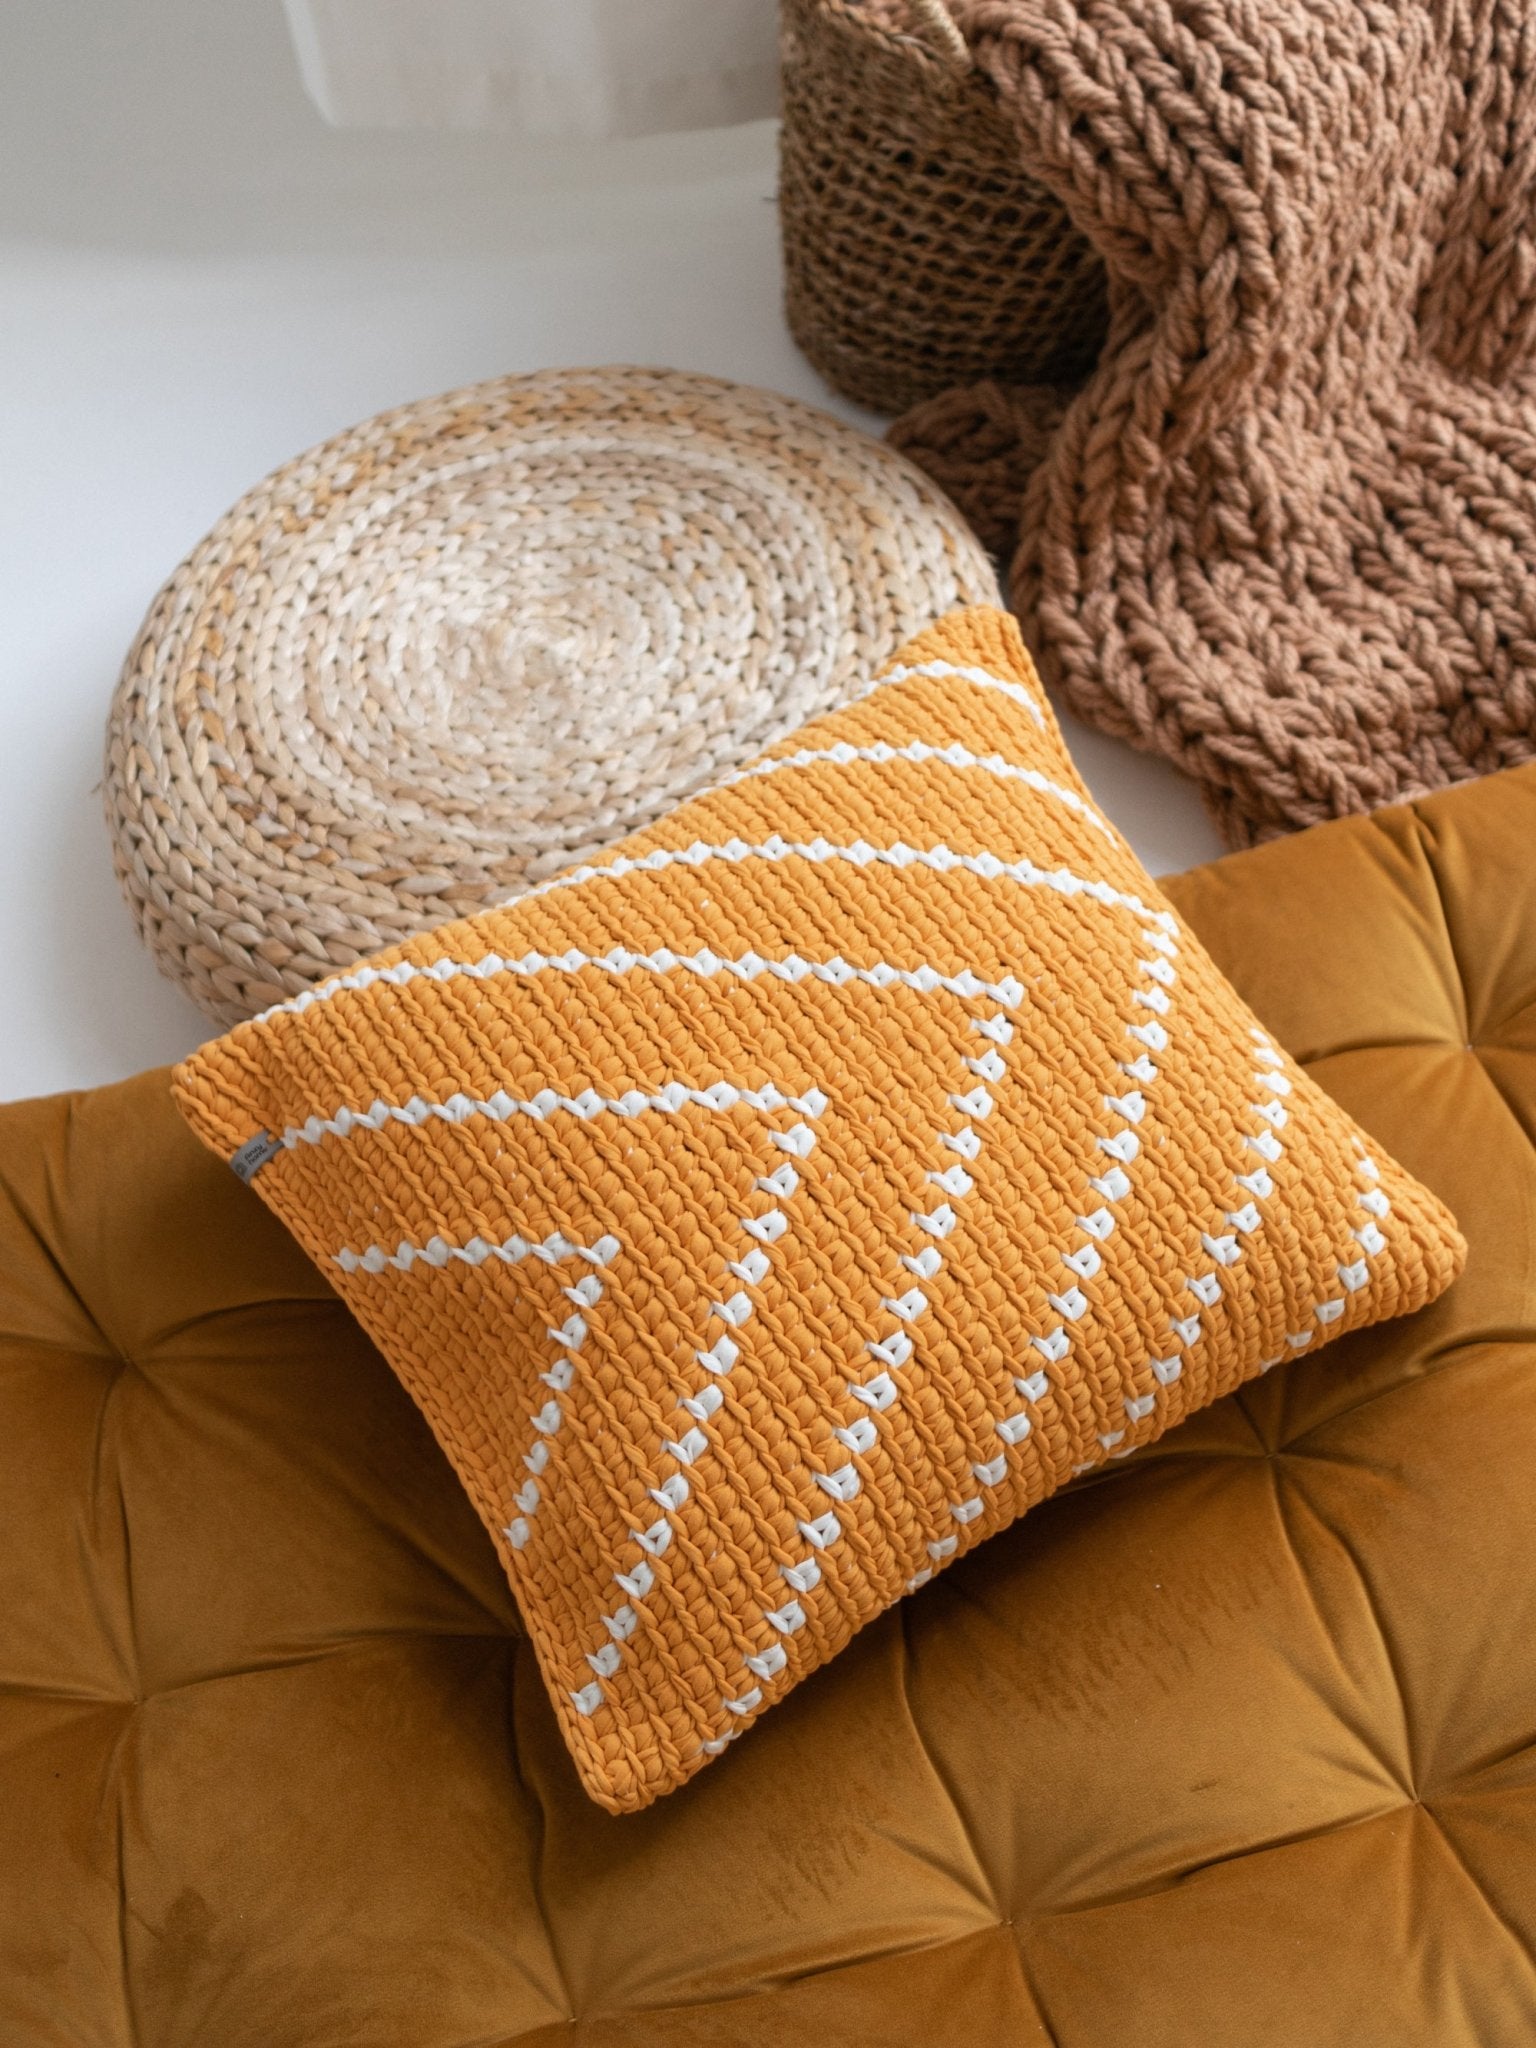 PATTERNED HANDKNIT PILLOW MUSTARD AND WHITE 20” - The Modern Heritage